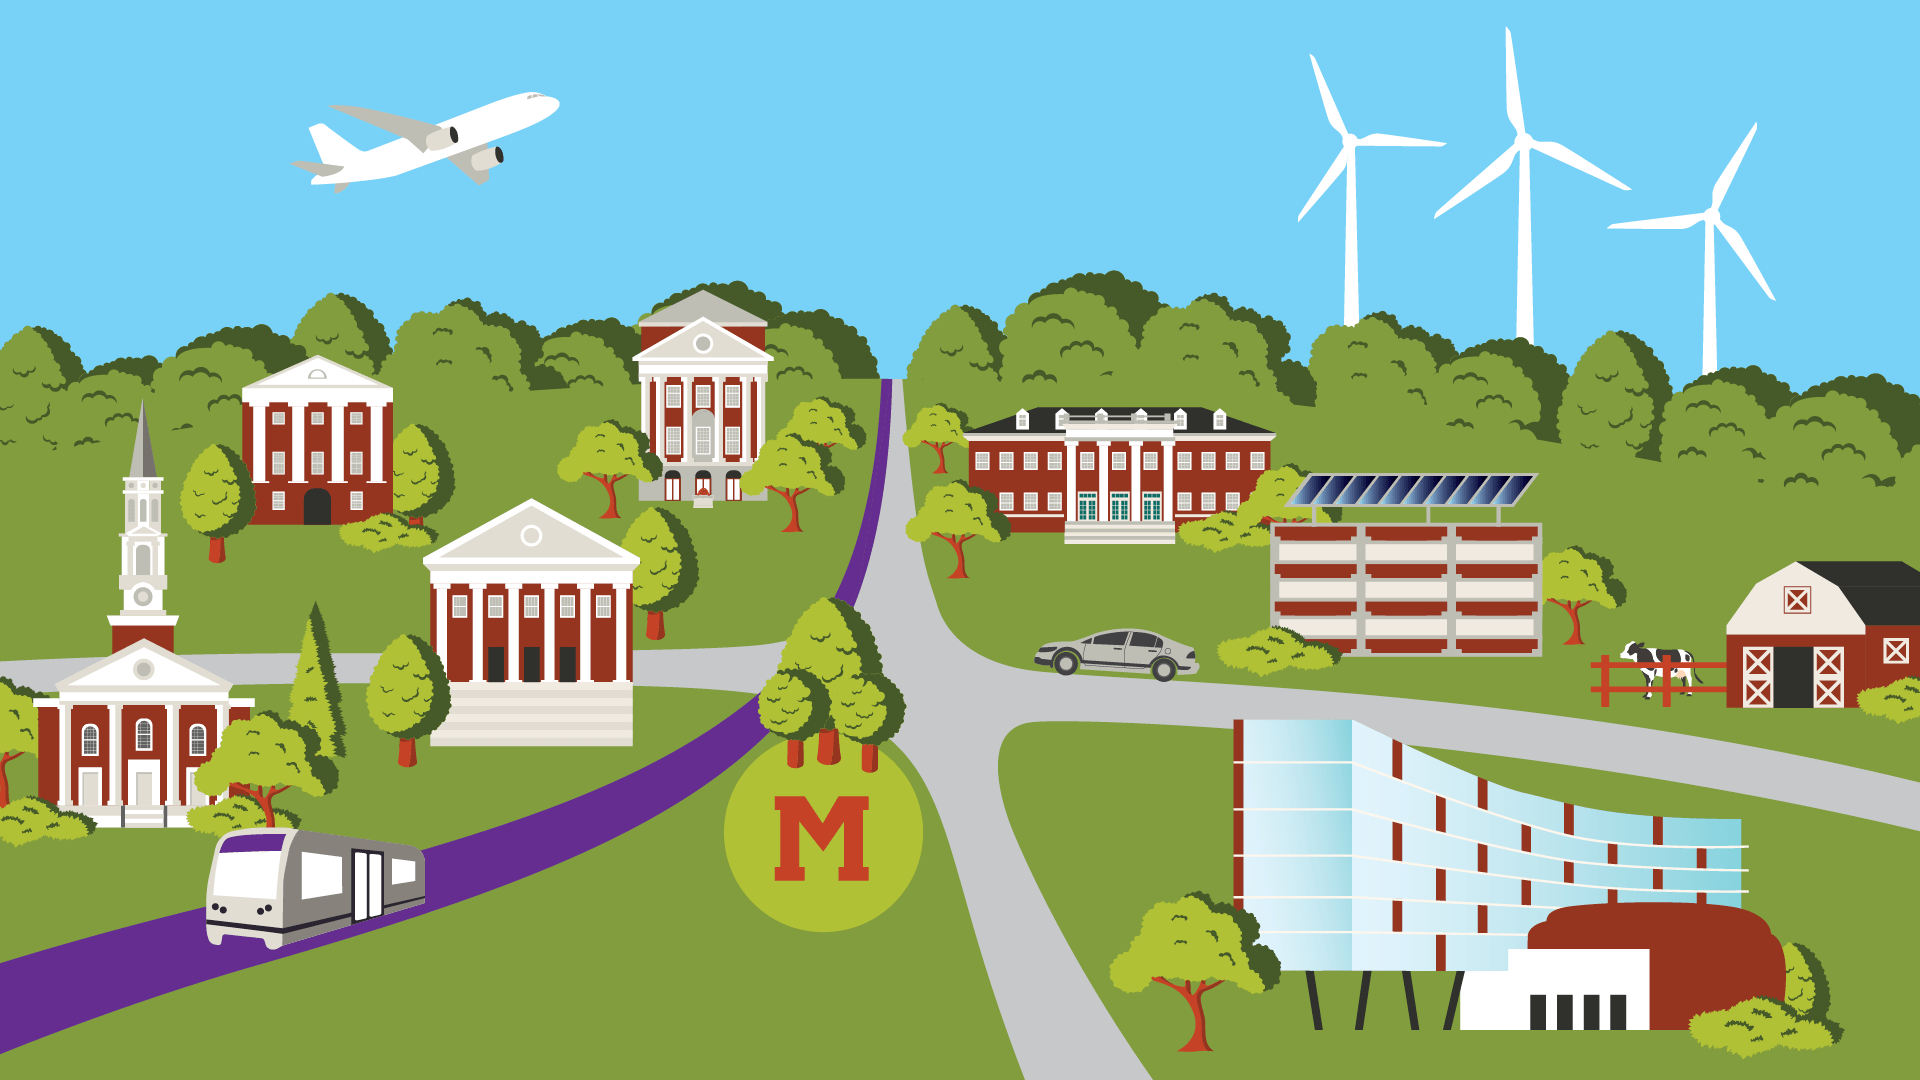  Measures designed to move UMD toward eventual carbon neutrality in 2050 are taking effect all over campus. (Illustrations by Matt Laumann)